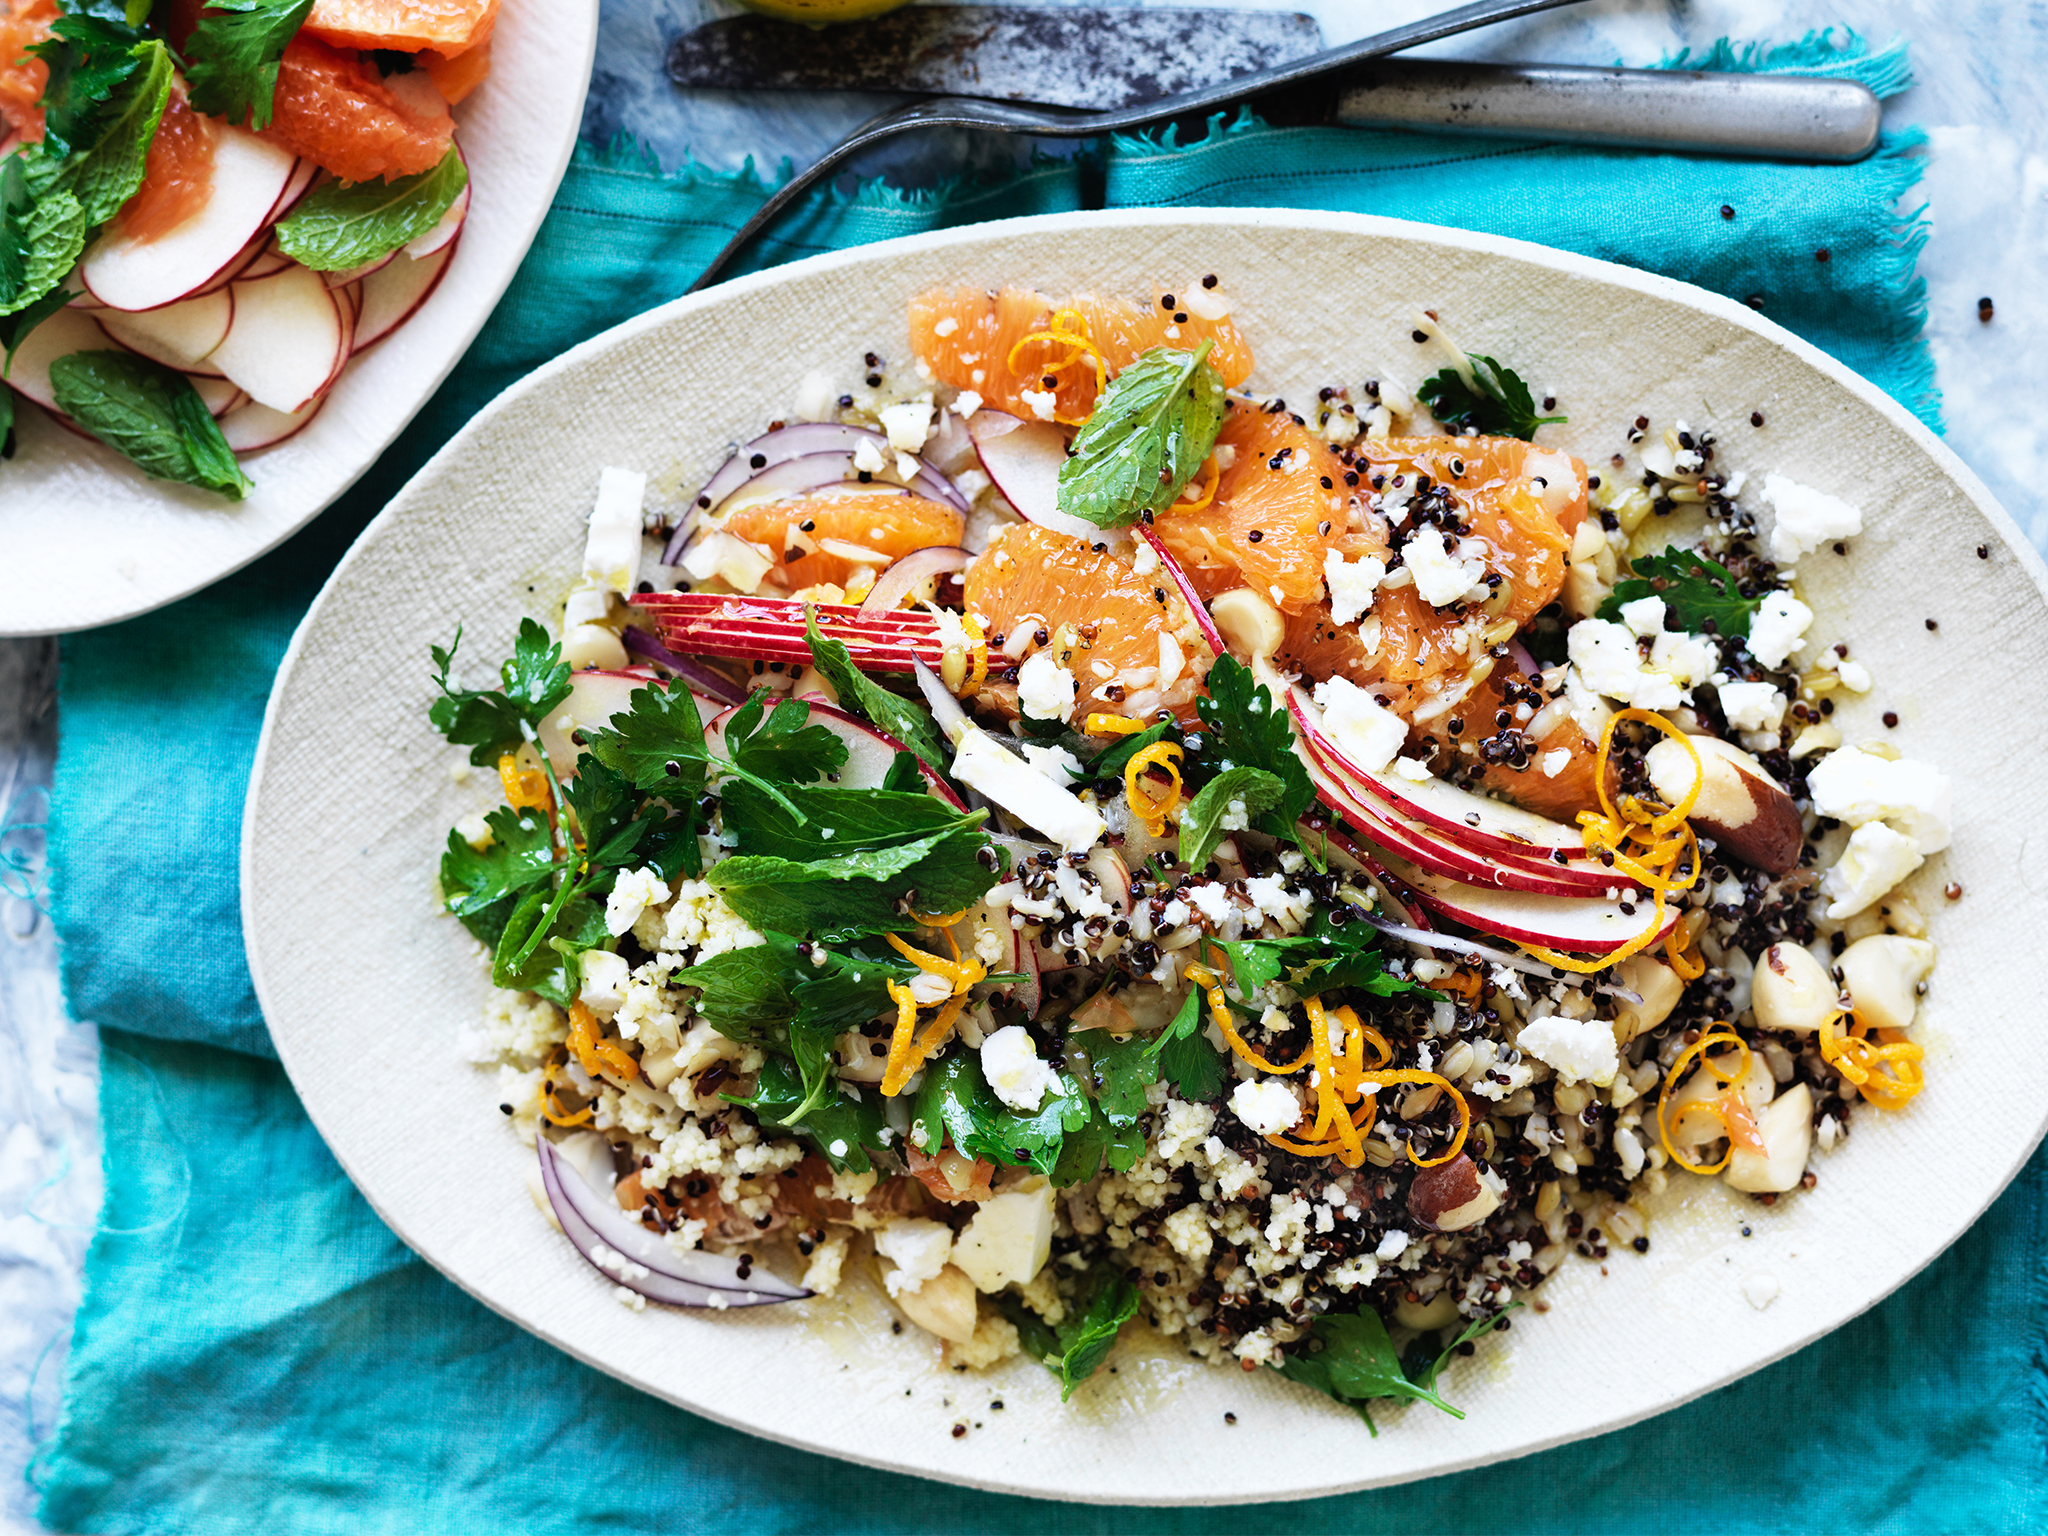 Five grain salad with feta and oranges